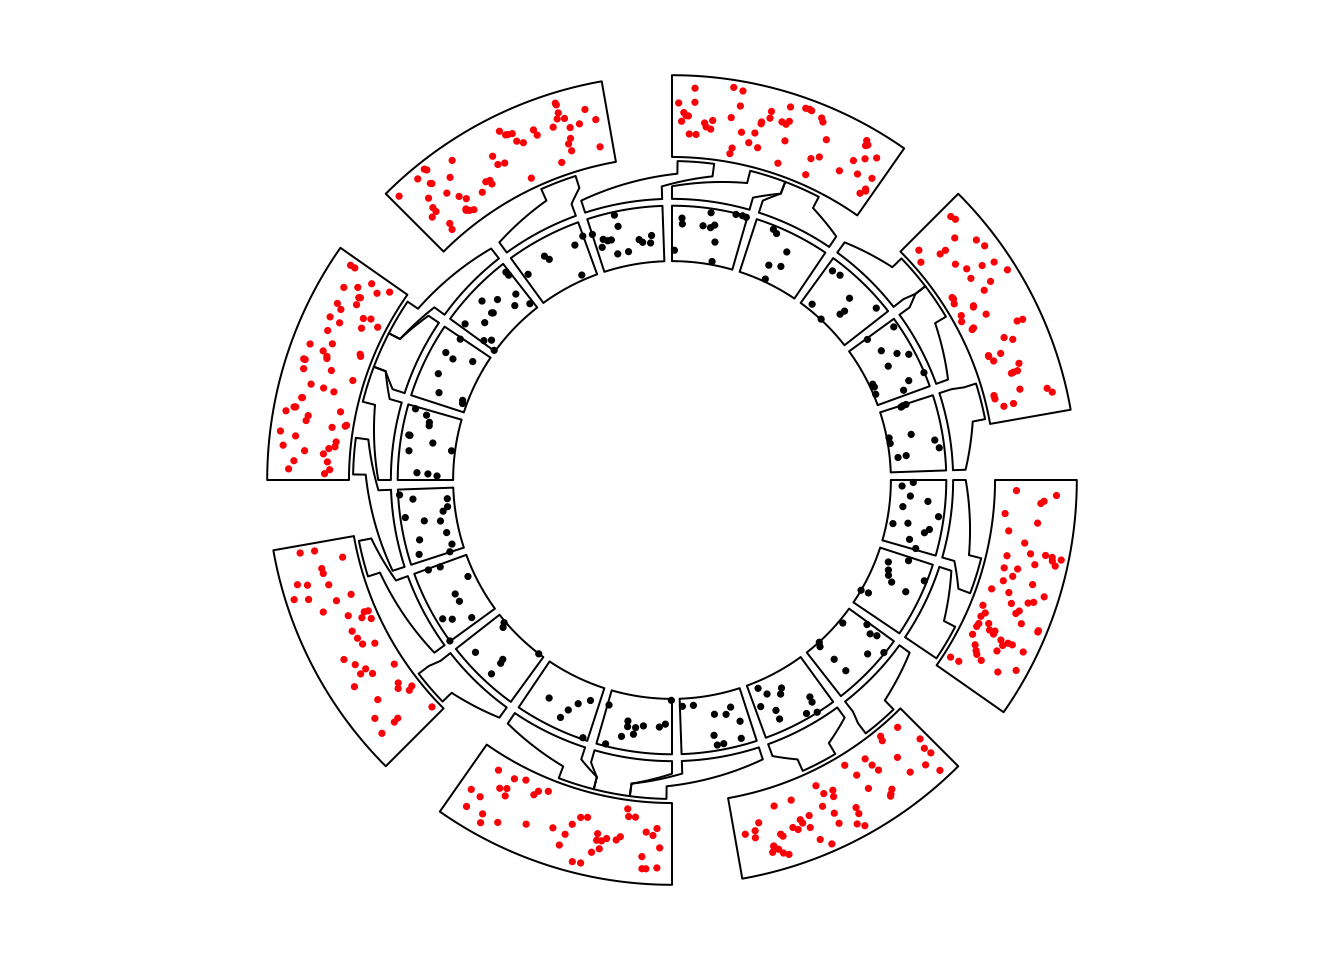 Nested zooming between two circular plots.